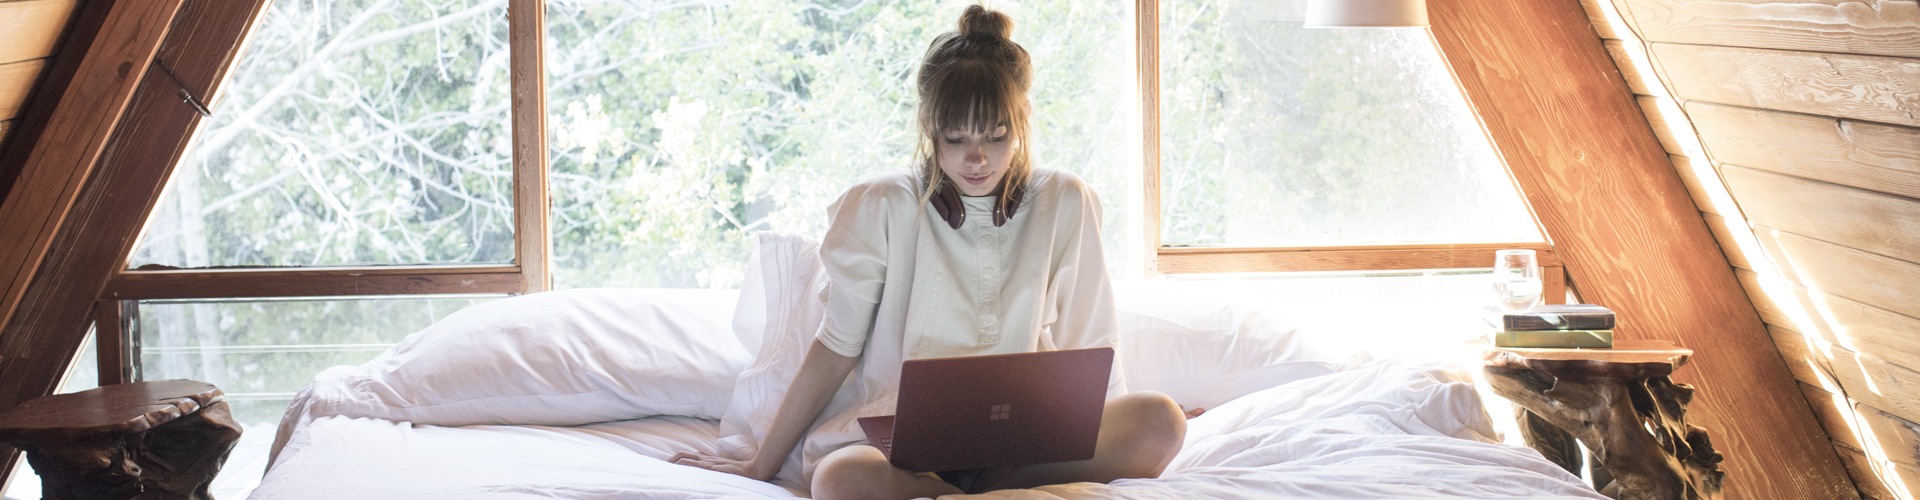 Person sitting on their bed working on a Surface laptop